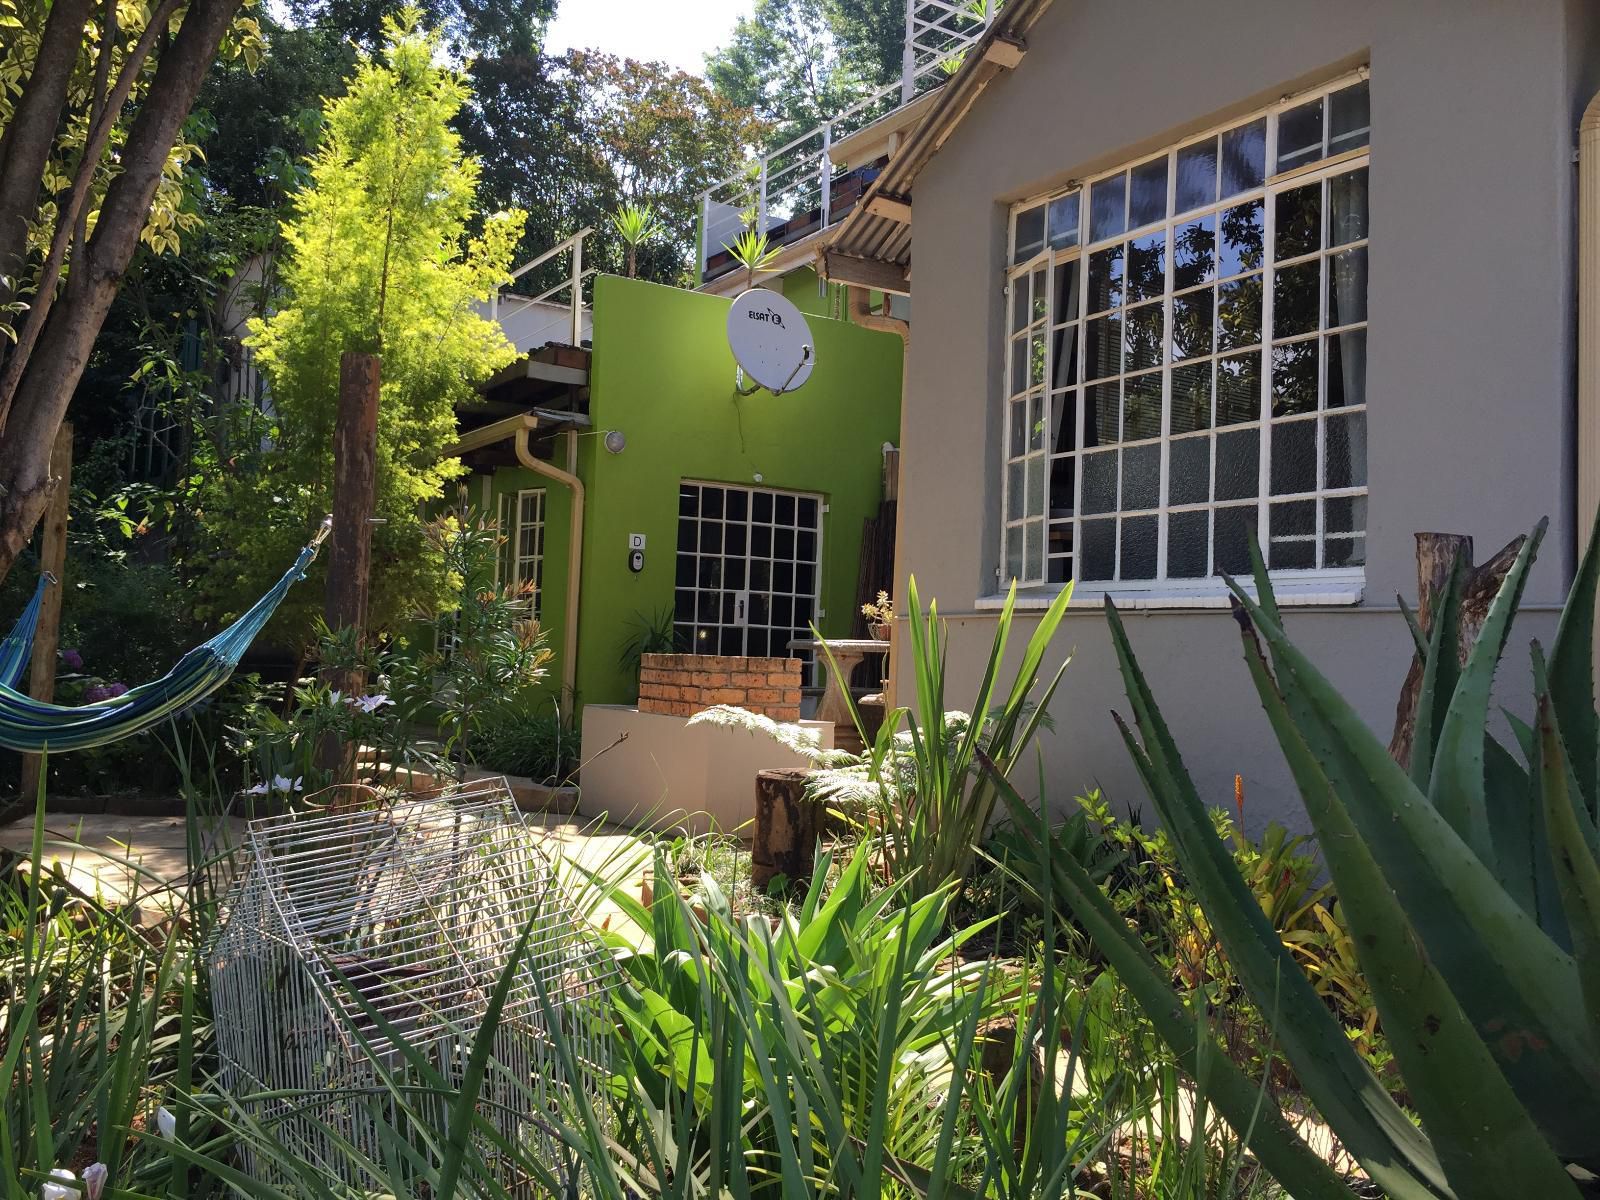 Sabie Self Catering Apartments Sabie Mpumalanga South Africa House, Building, Architecture, Palm Tree, Plant, Nature, Wood, Garden